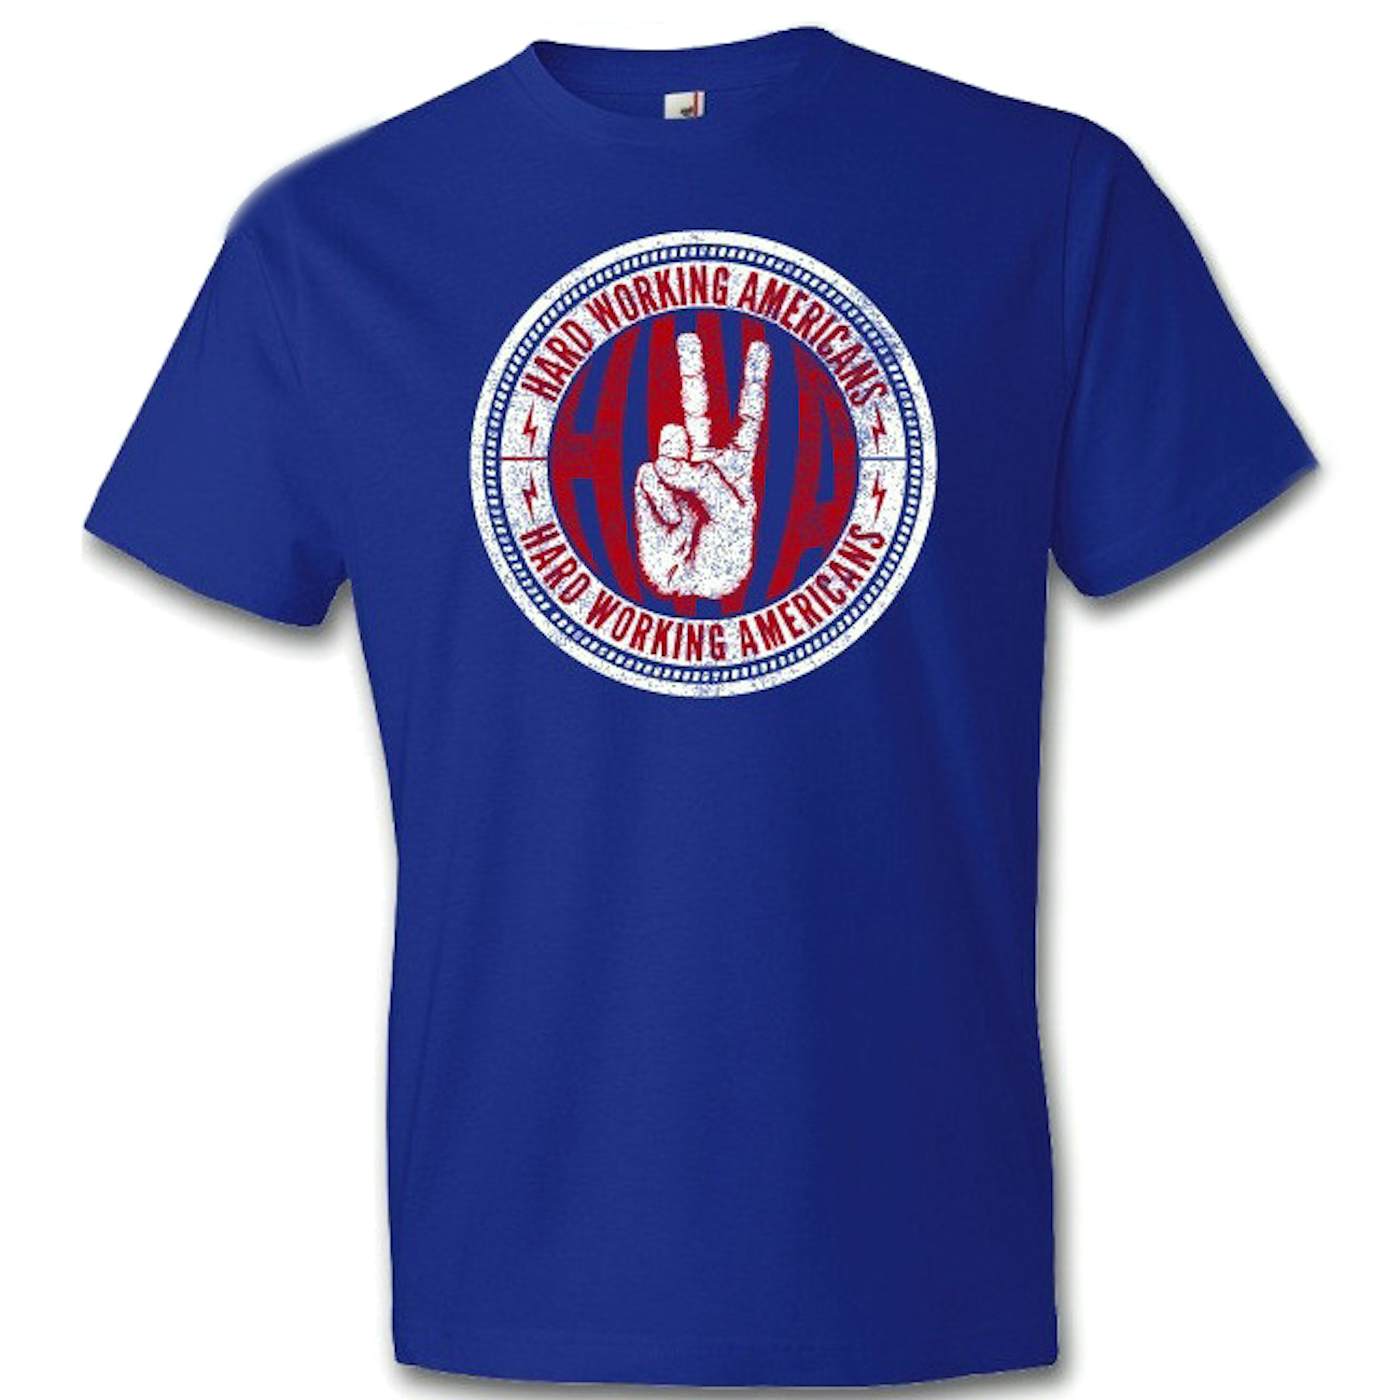 Hard Working Americans Blue/Red/White Union Logo T-shirt